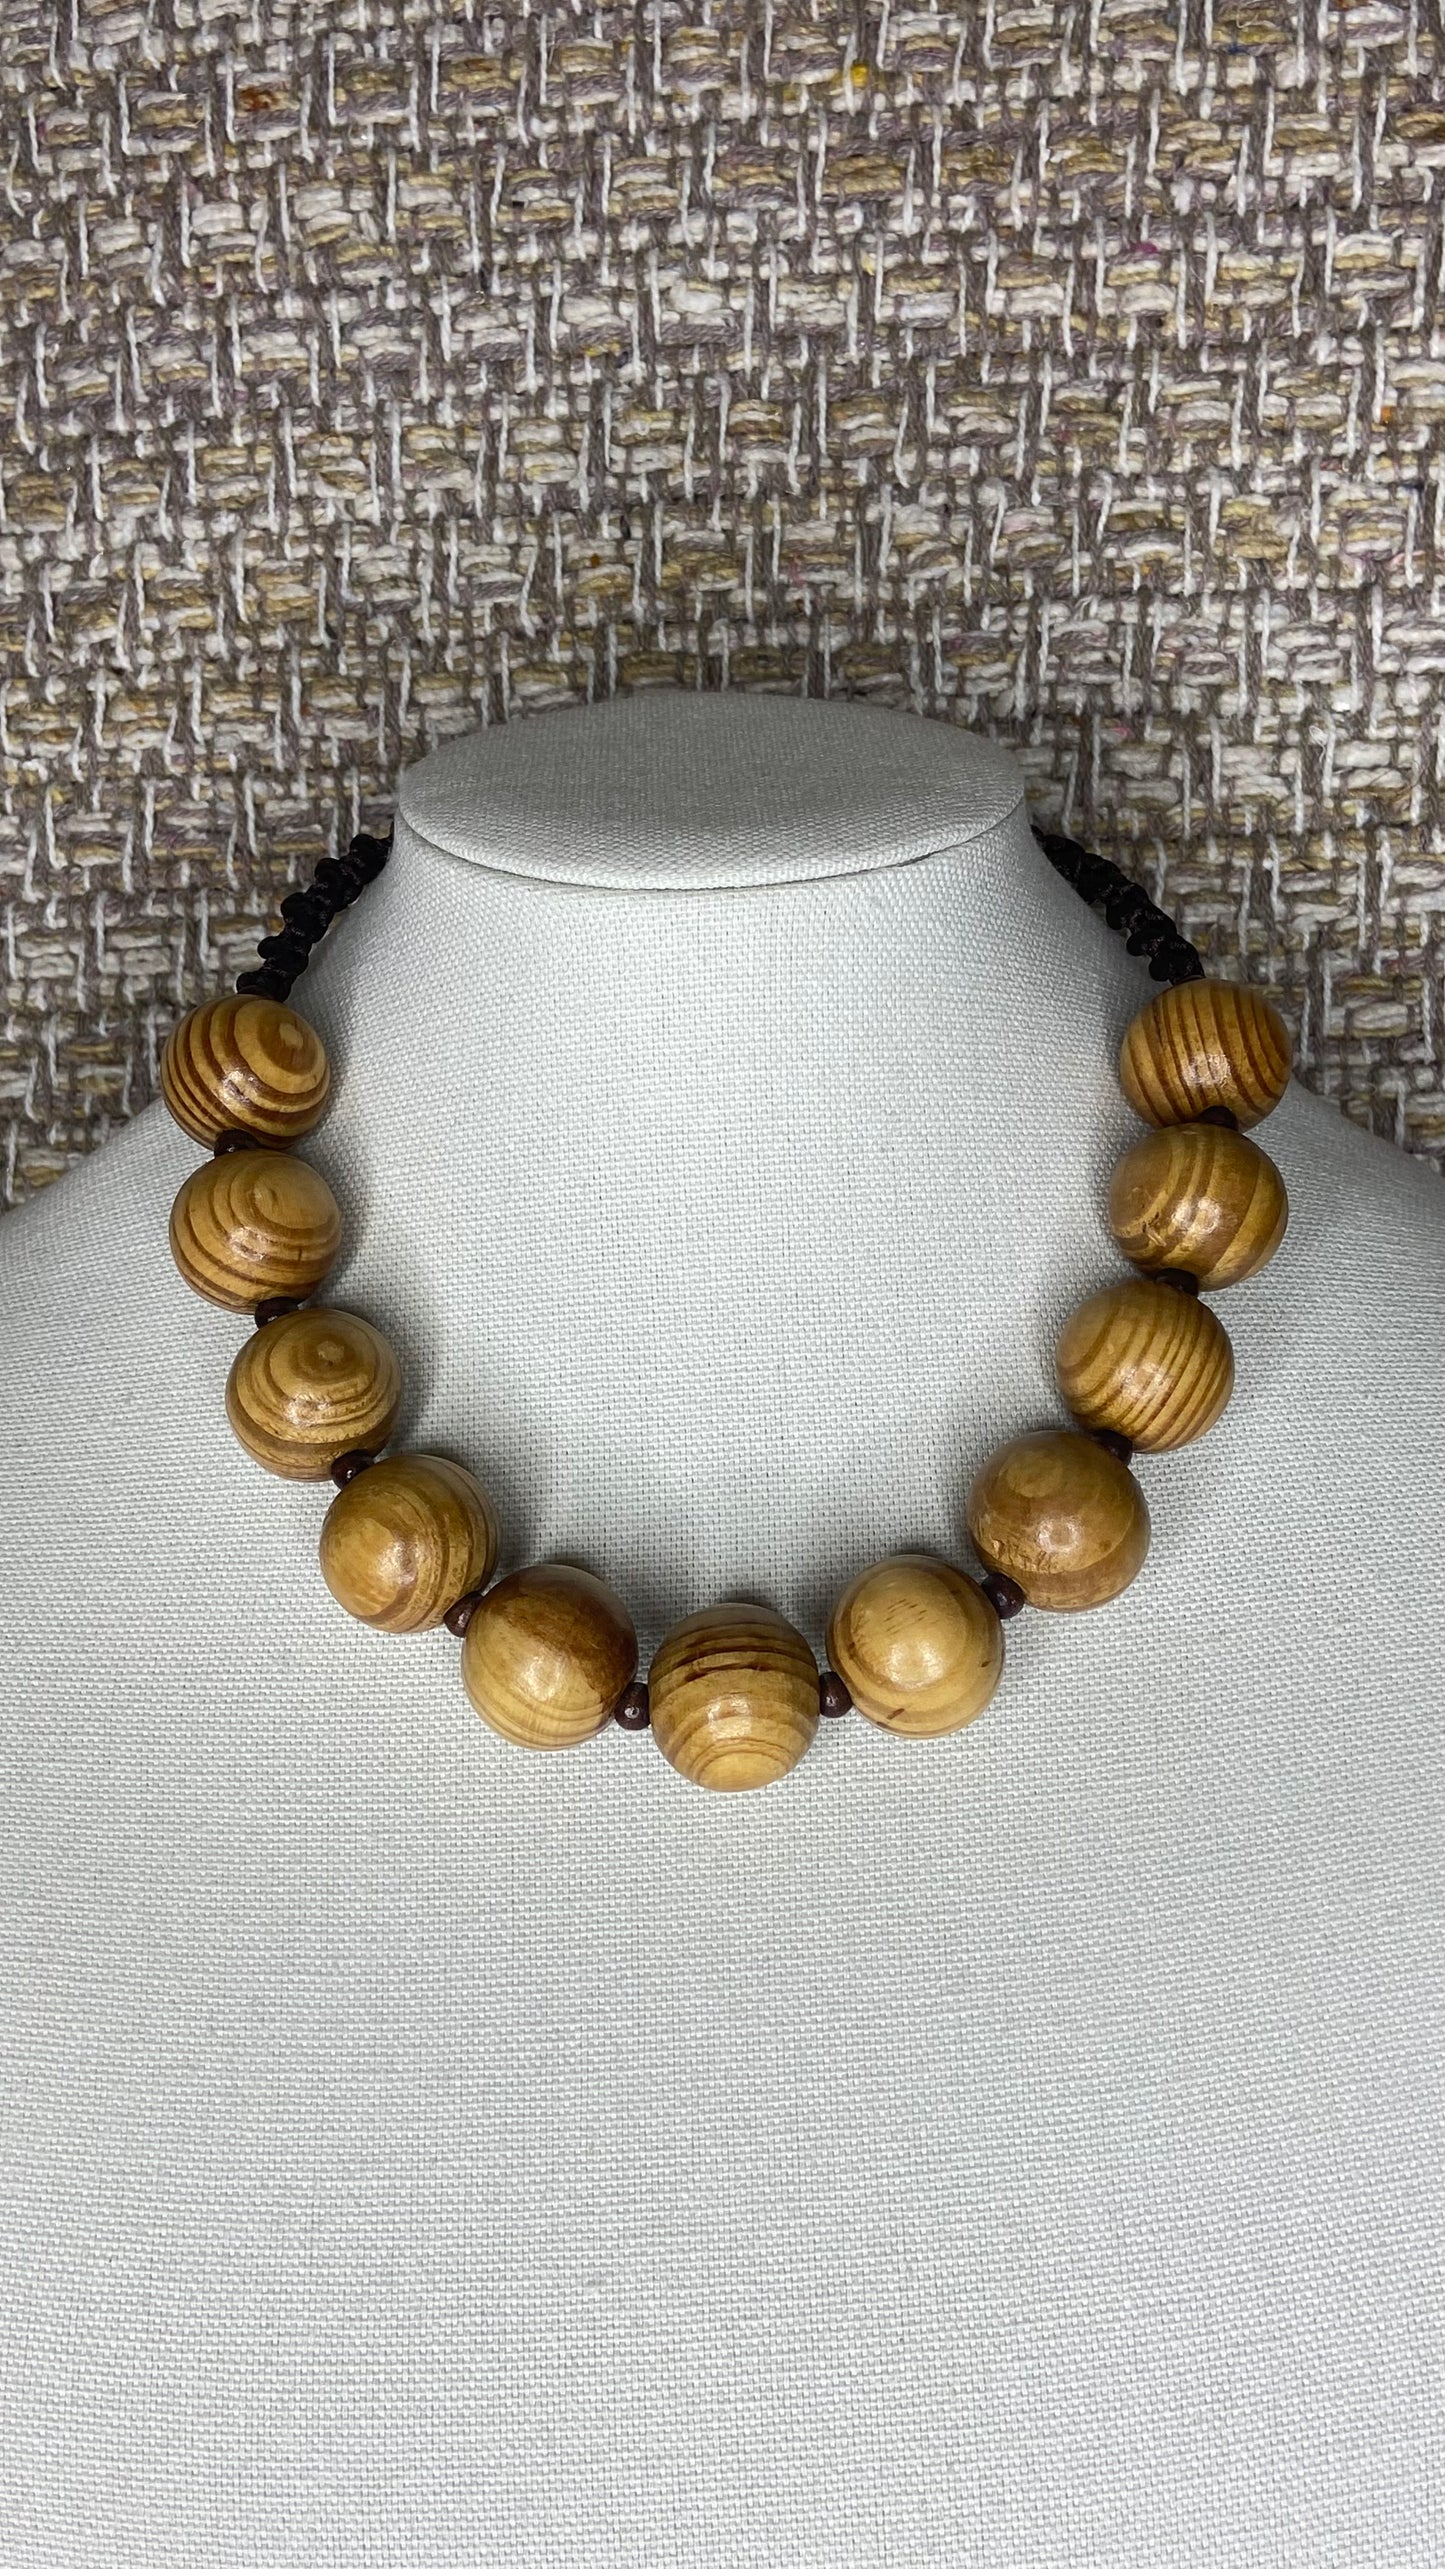 Chunky Wood Bead Necklace, Beaded Necklace, Handmade Jewelry - Candmjewelrydesigns